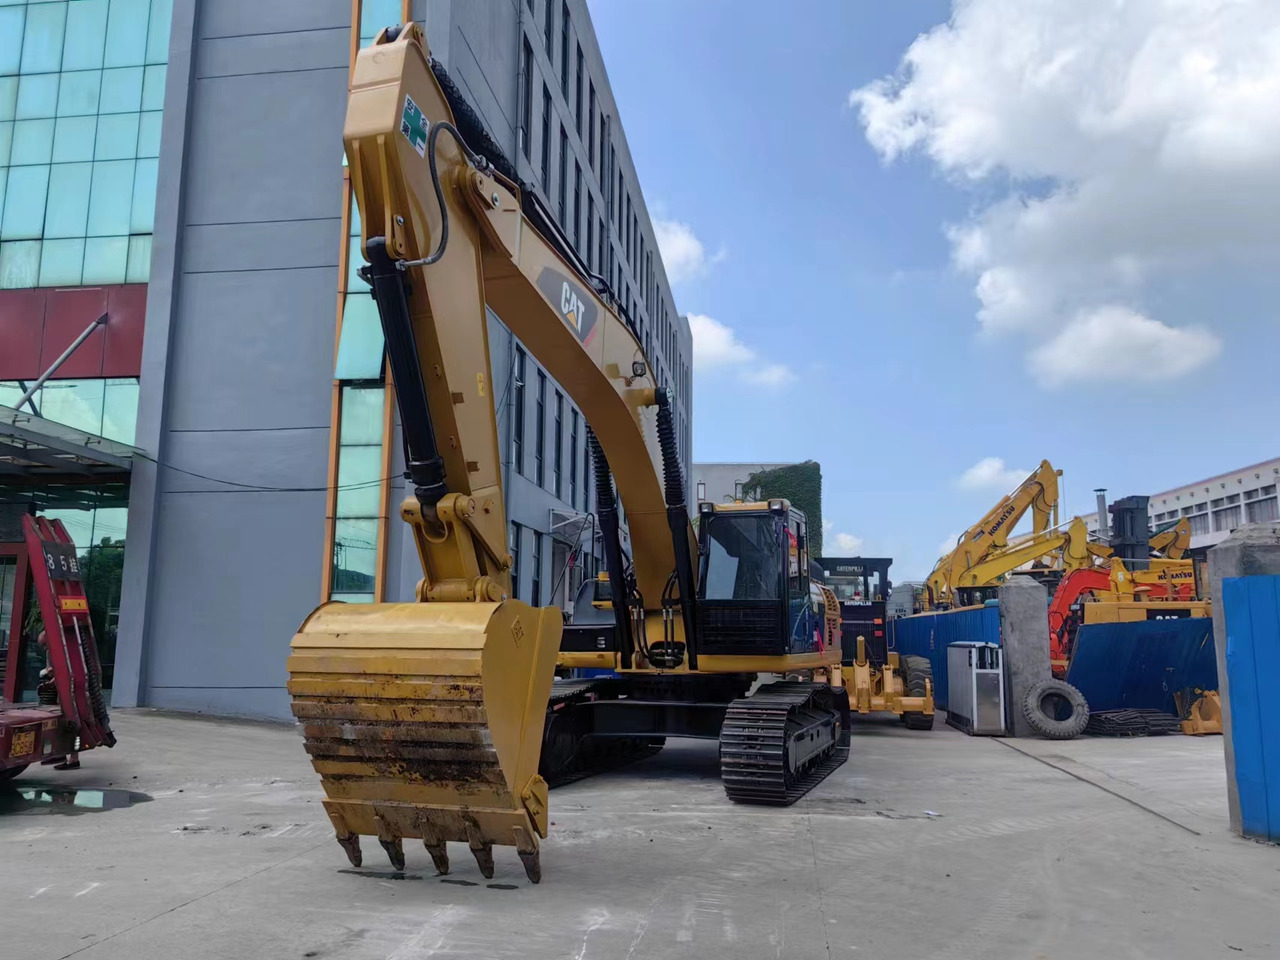 Crawler excavator 95%new Original Japan made CATERPILLAR Cat 336D2, Large engineering construction machinery good condition in stock hot selling !!!: picture 5